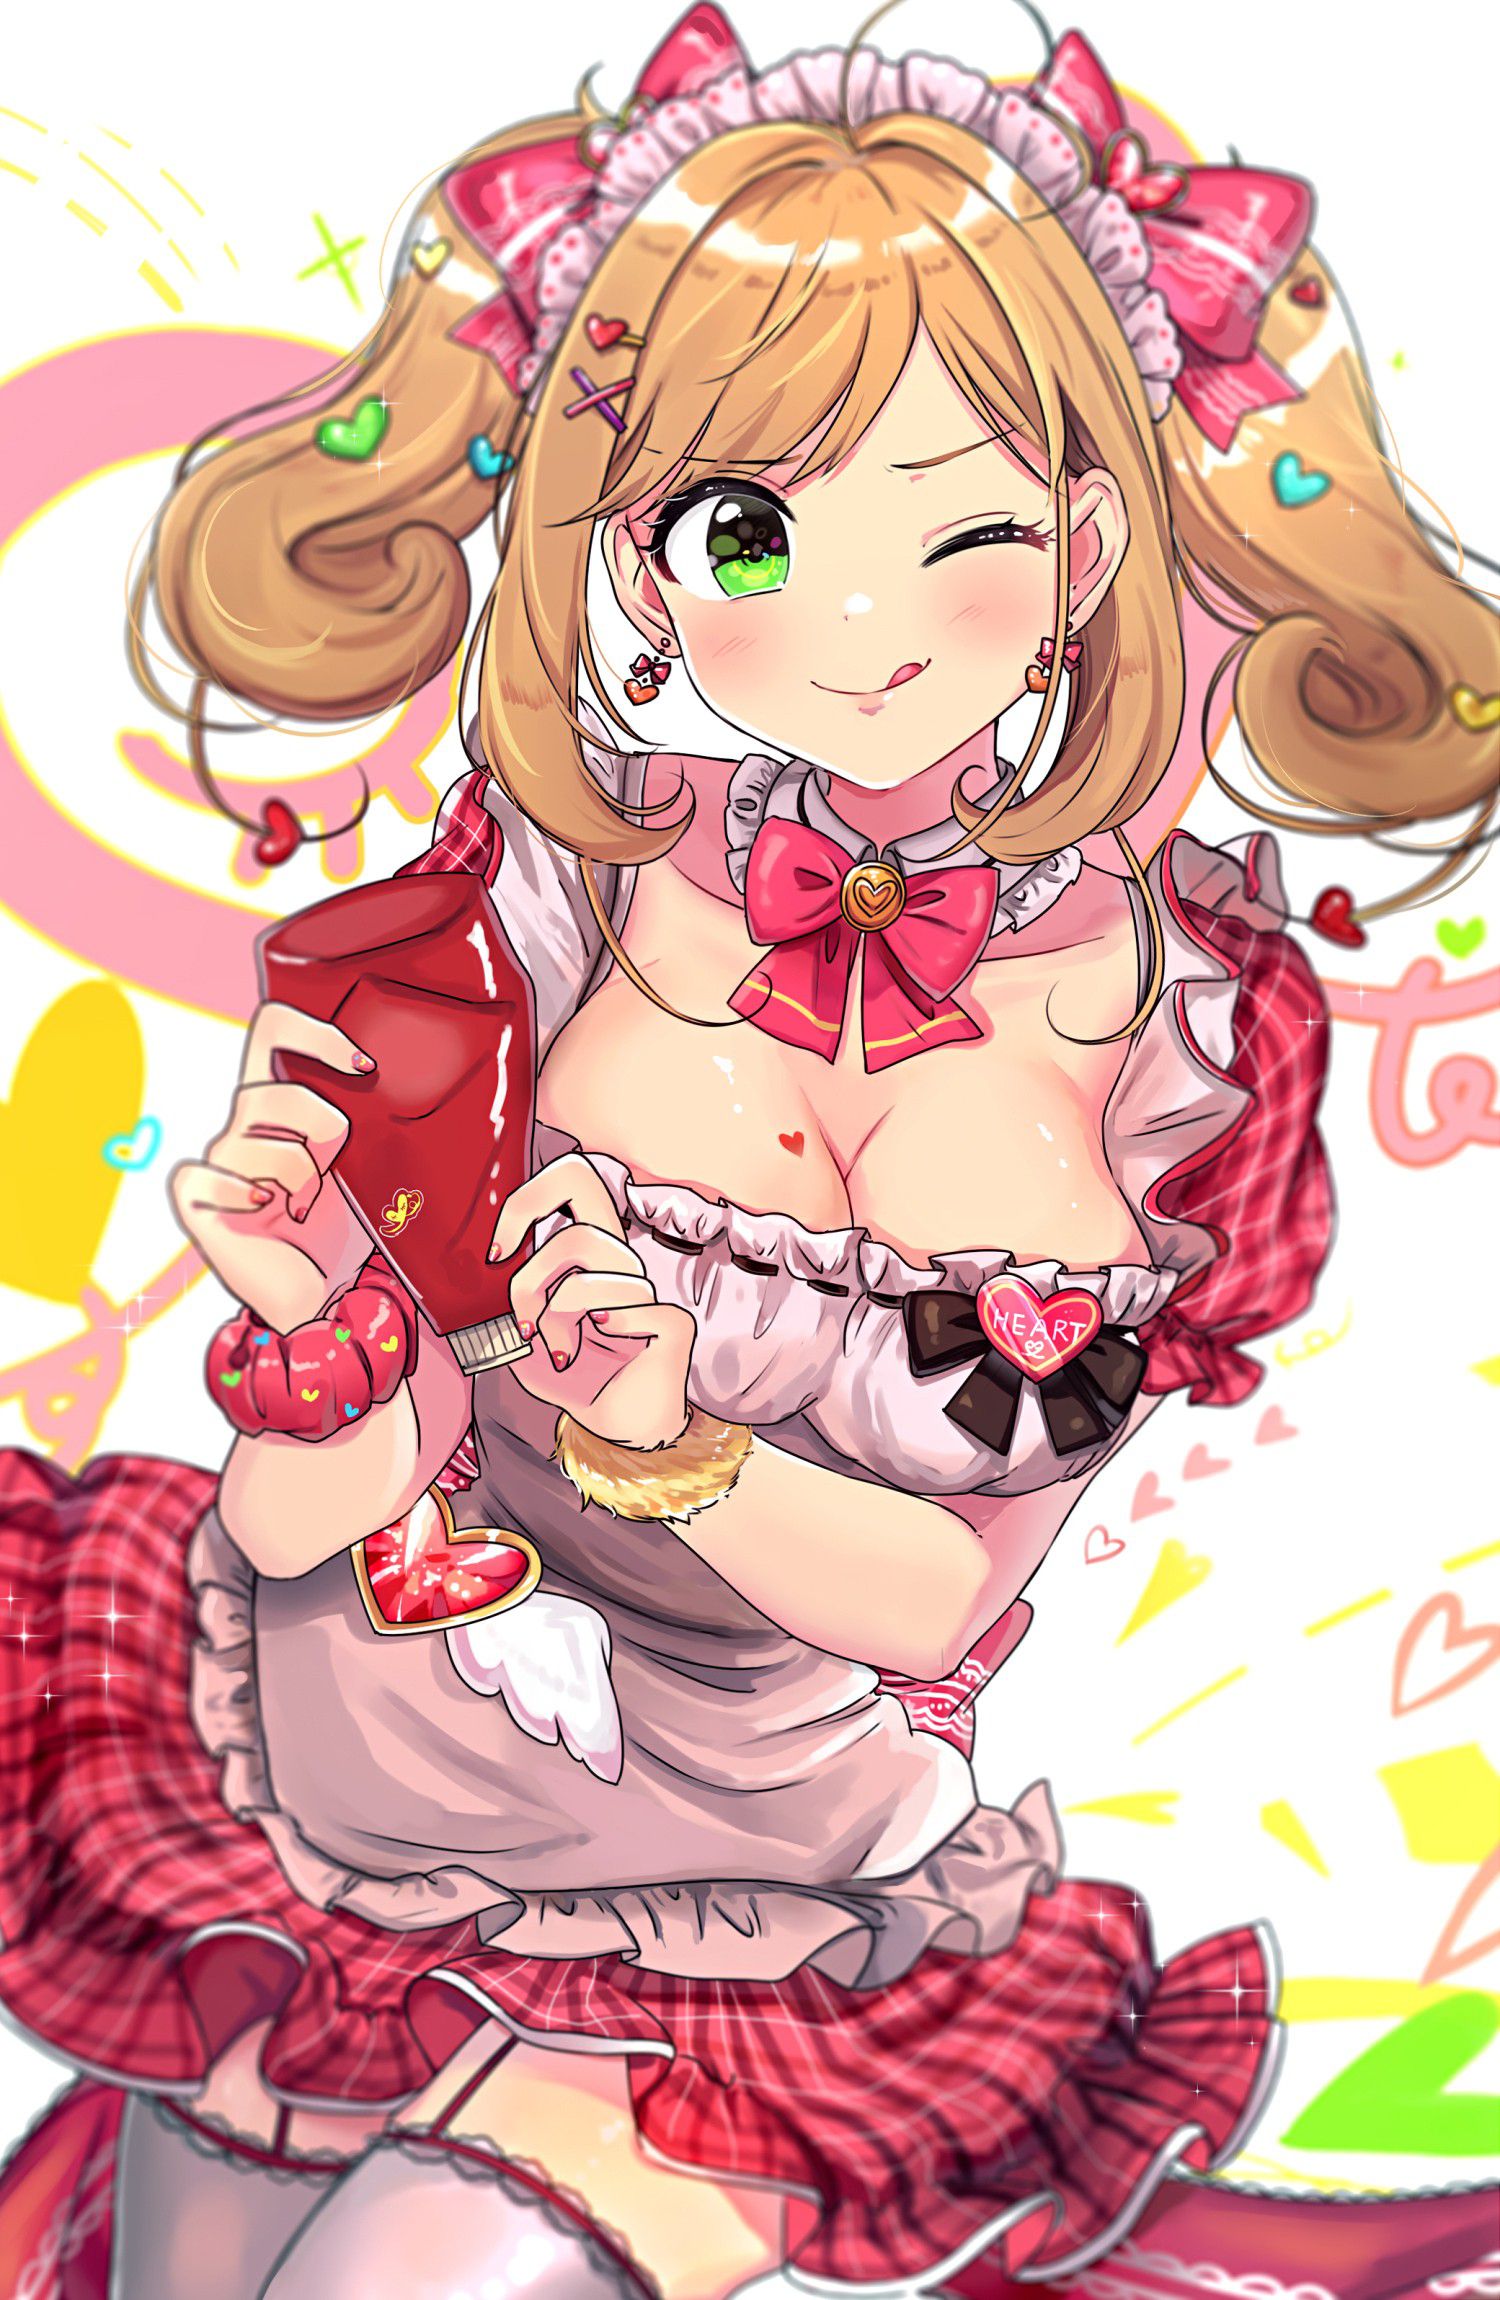 Cute two-dimensional image of the idol master. 17